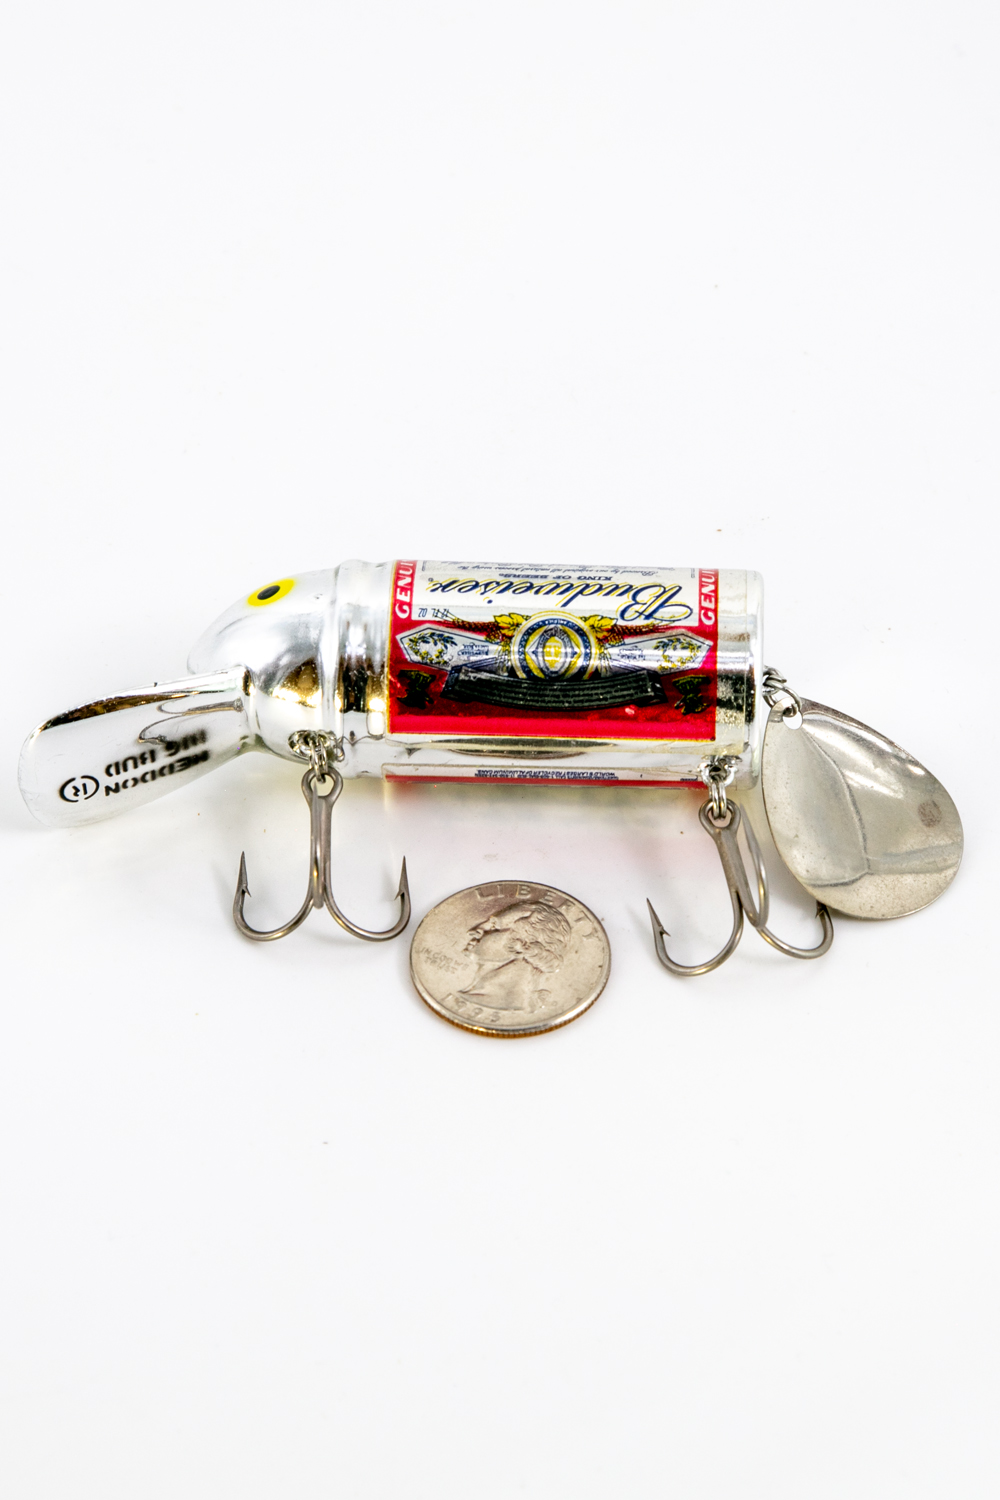 Big Bud Fishing Lures Can't